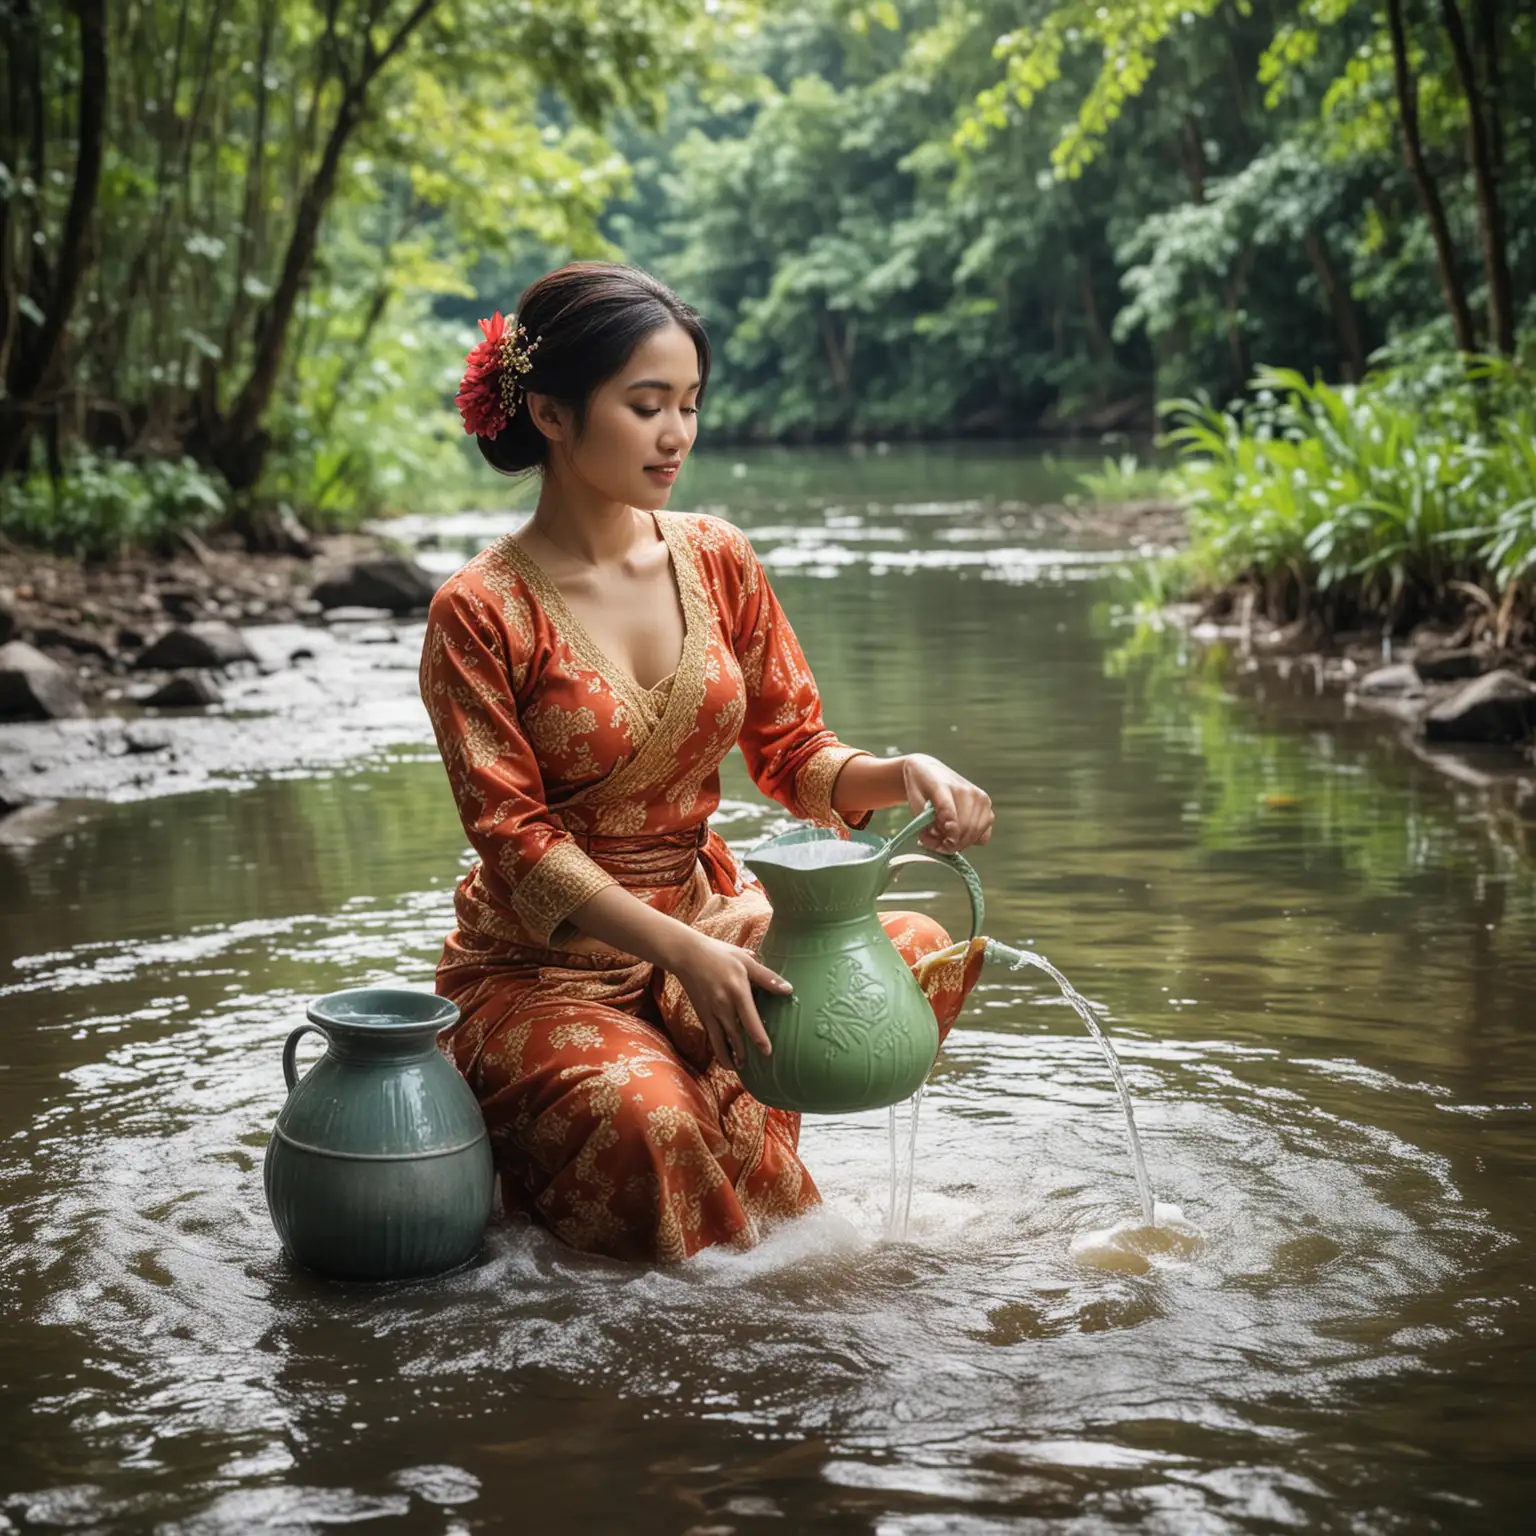 Traditional-Woman-Washing-Clothes-in-River-Amid-Lush-Forest